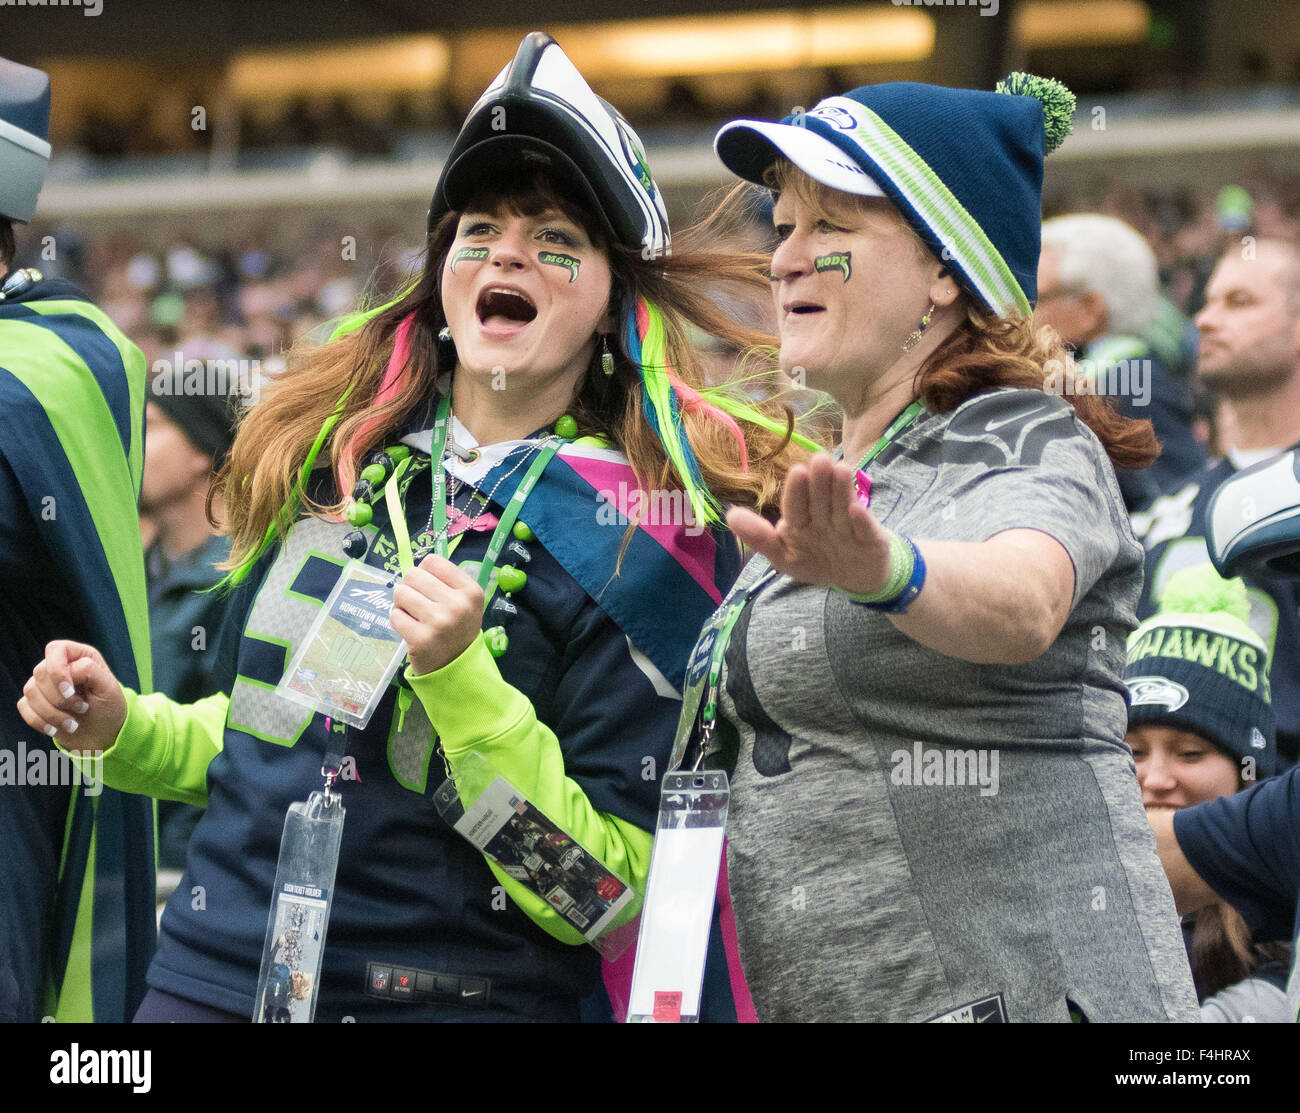 October 18, 2015: Seattle Seahawks fans cheering during NFL action between the Carolina Panthers and the Seattle Seahawks at CenturyLink Field in Seattle, Washington. The Seattle Seahawks fall to the Carolina Panthers 27 to 23. Joseph Weiser/CSM Stock Photo